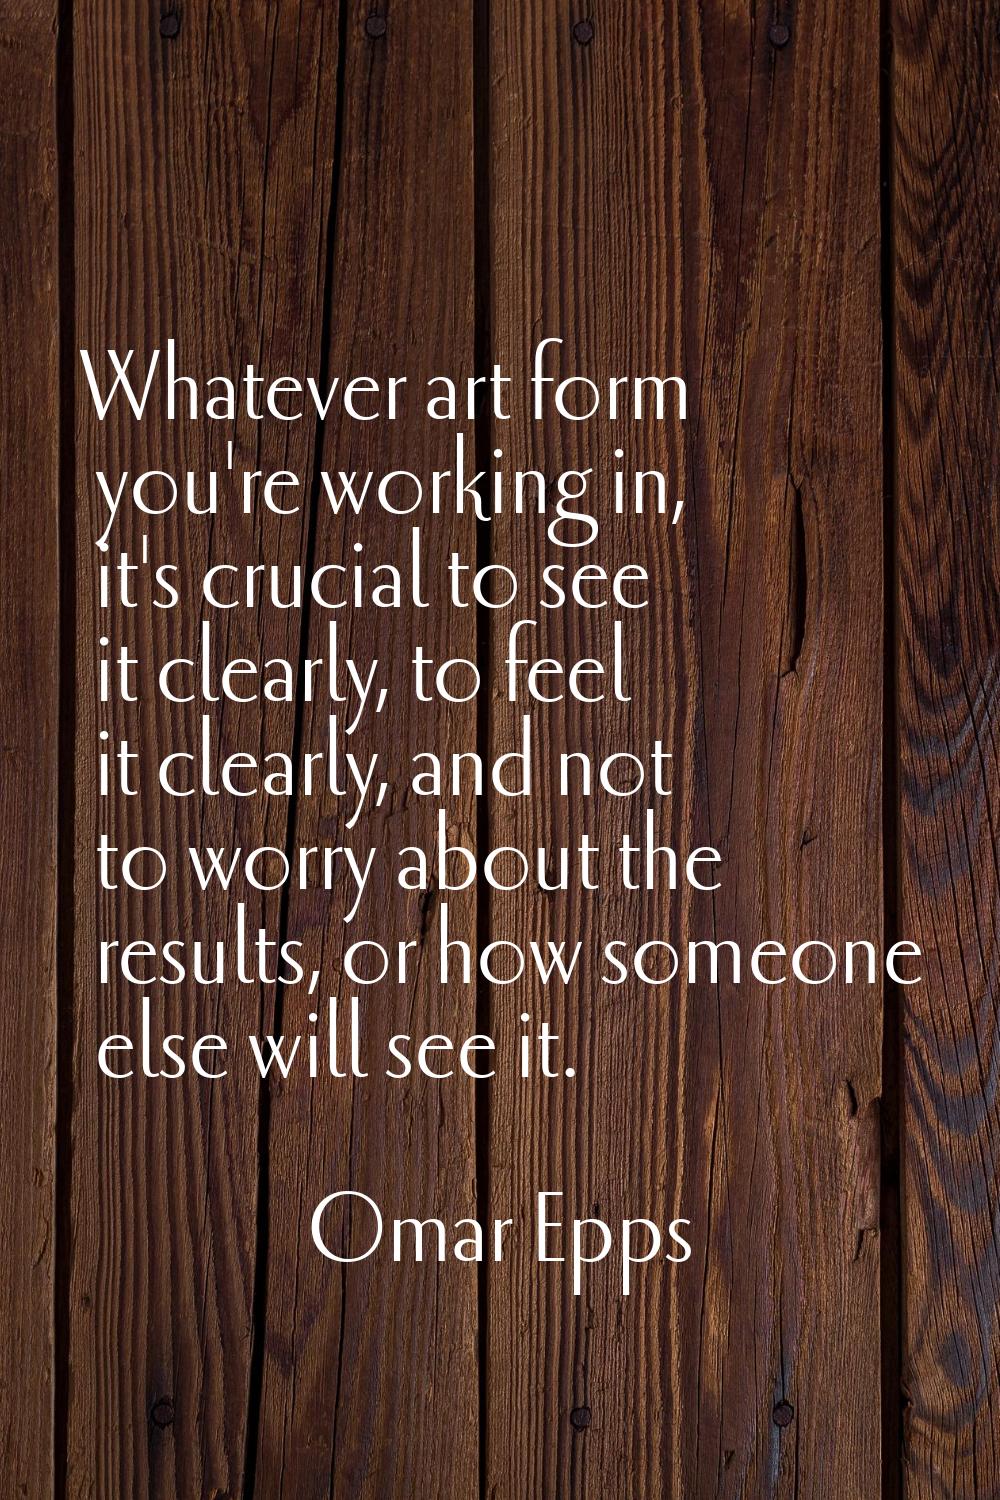 Whatever art form you're working in, it's crucial to see it clearly, to feel it clearly, and not to